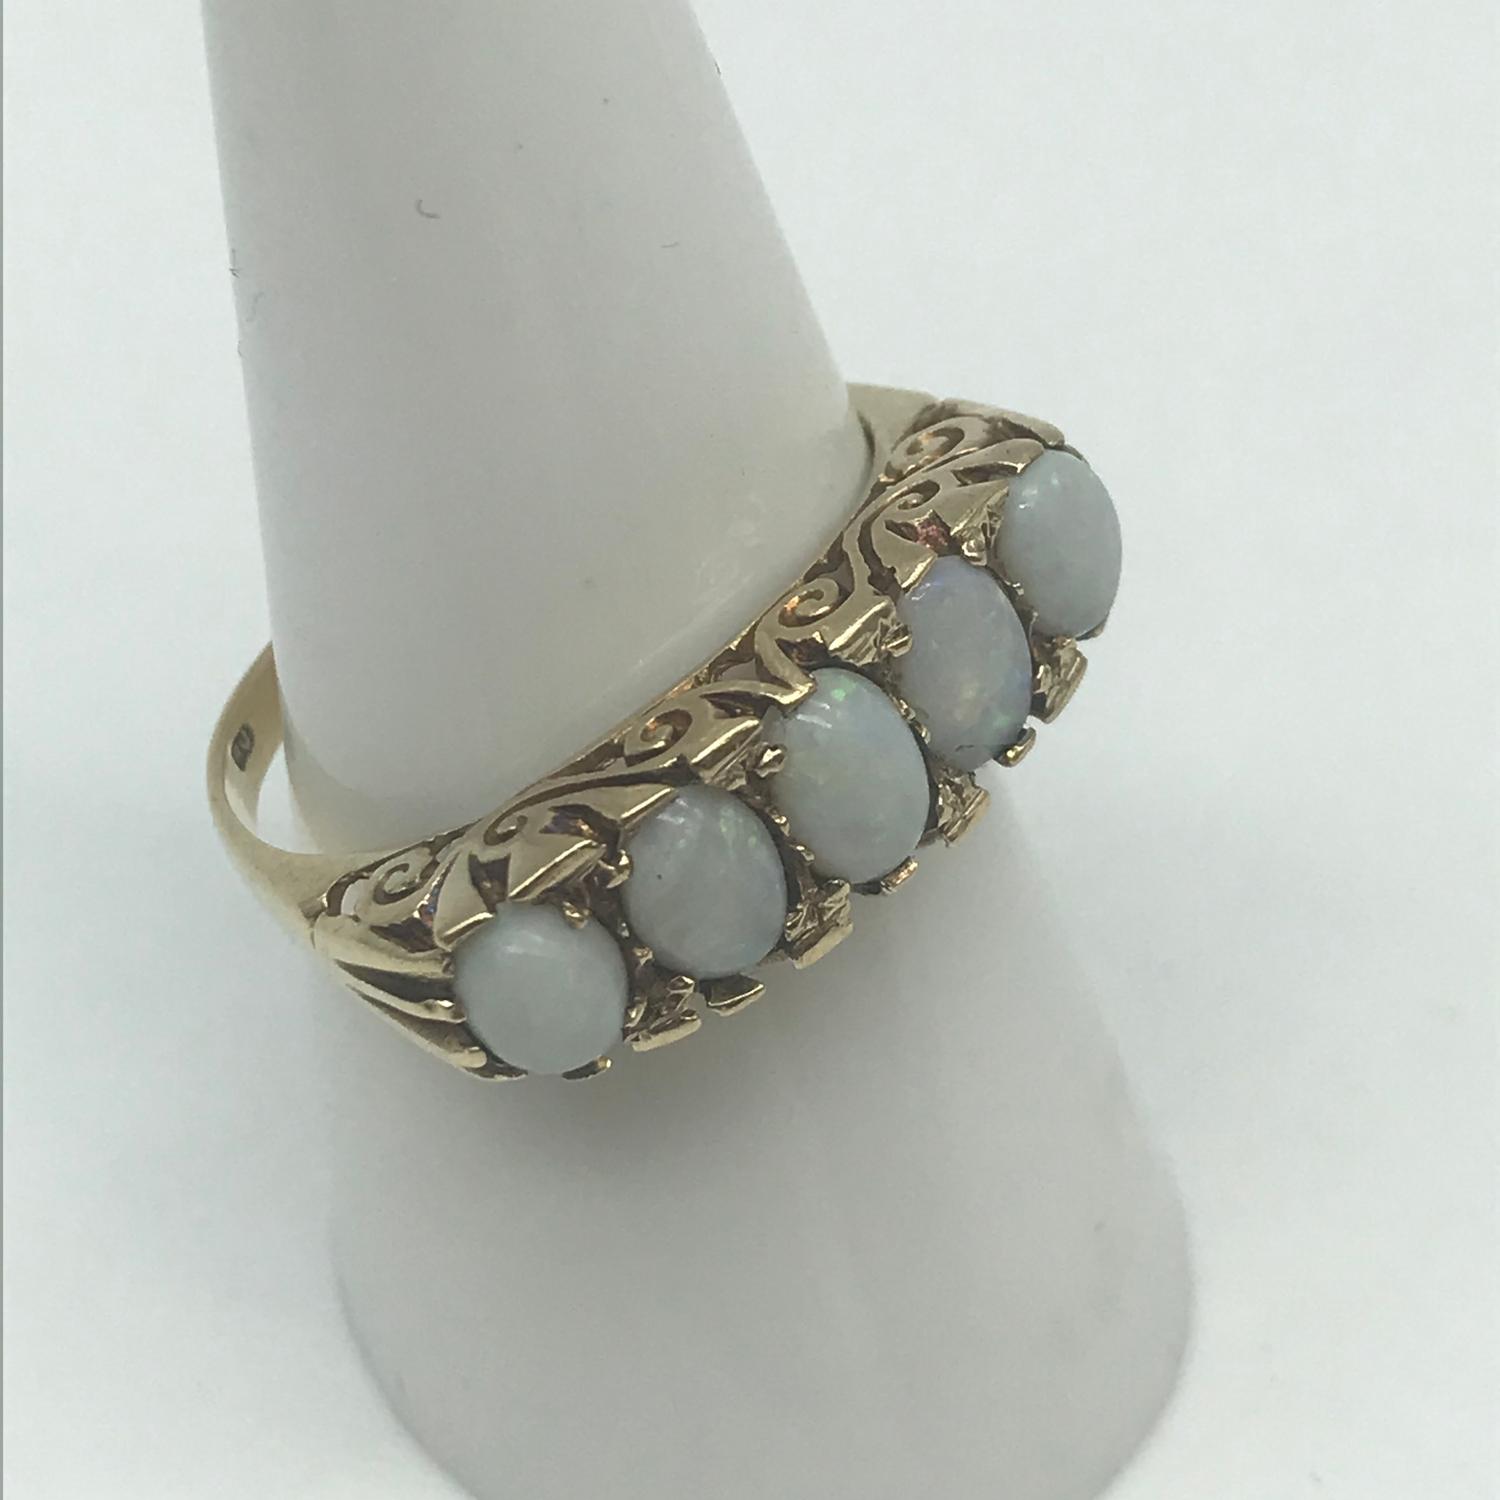 A 9ct gold ladies large set opal set ring, Consists of 5 large opal stones, Ring size Q, Weighs 3.